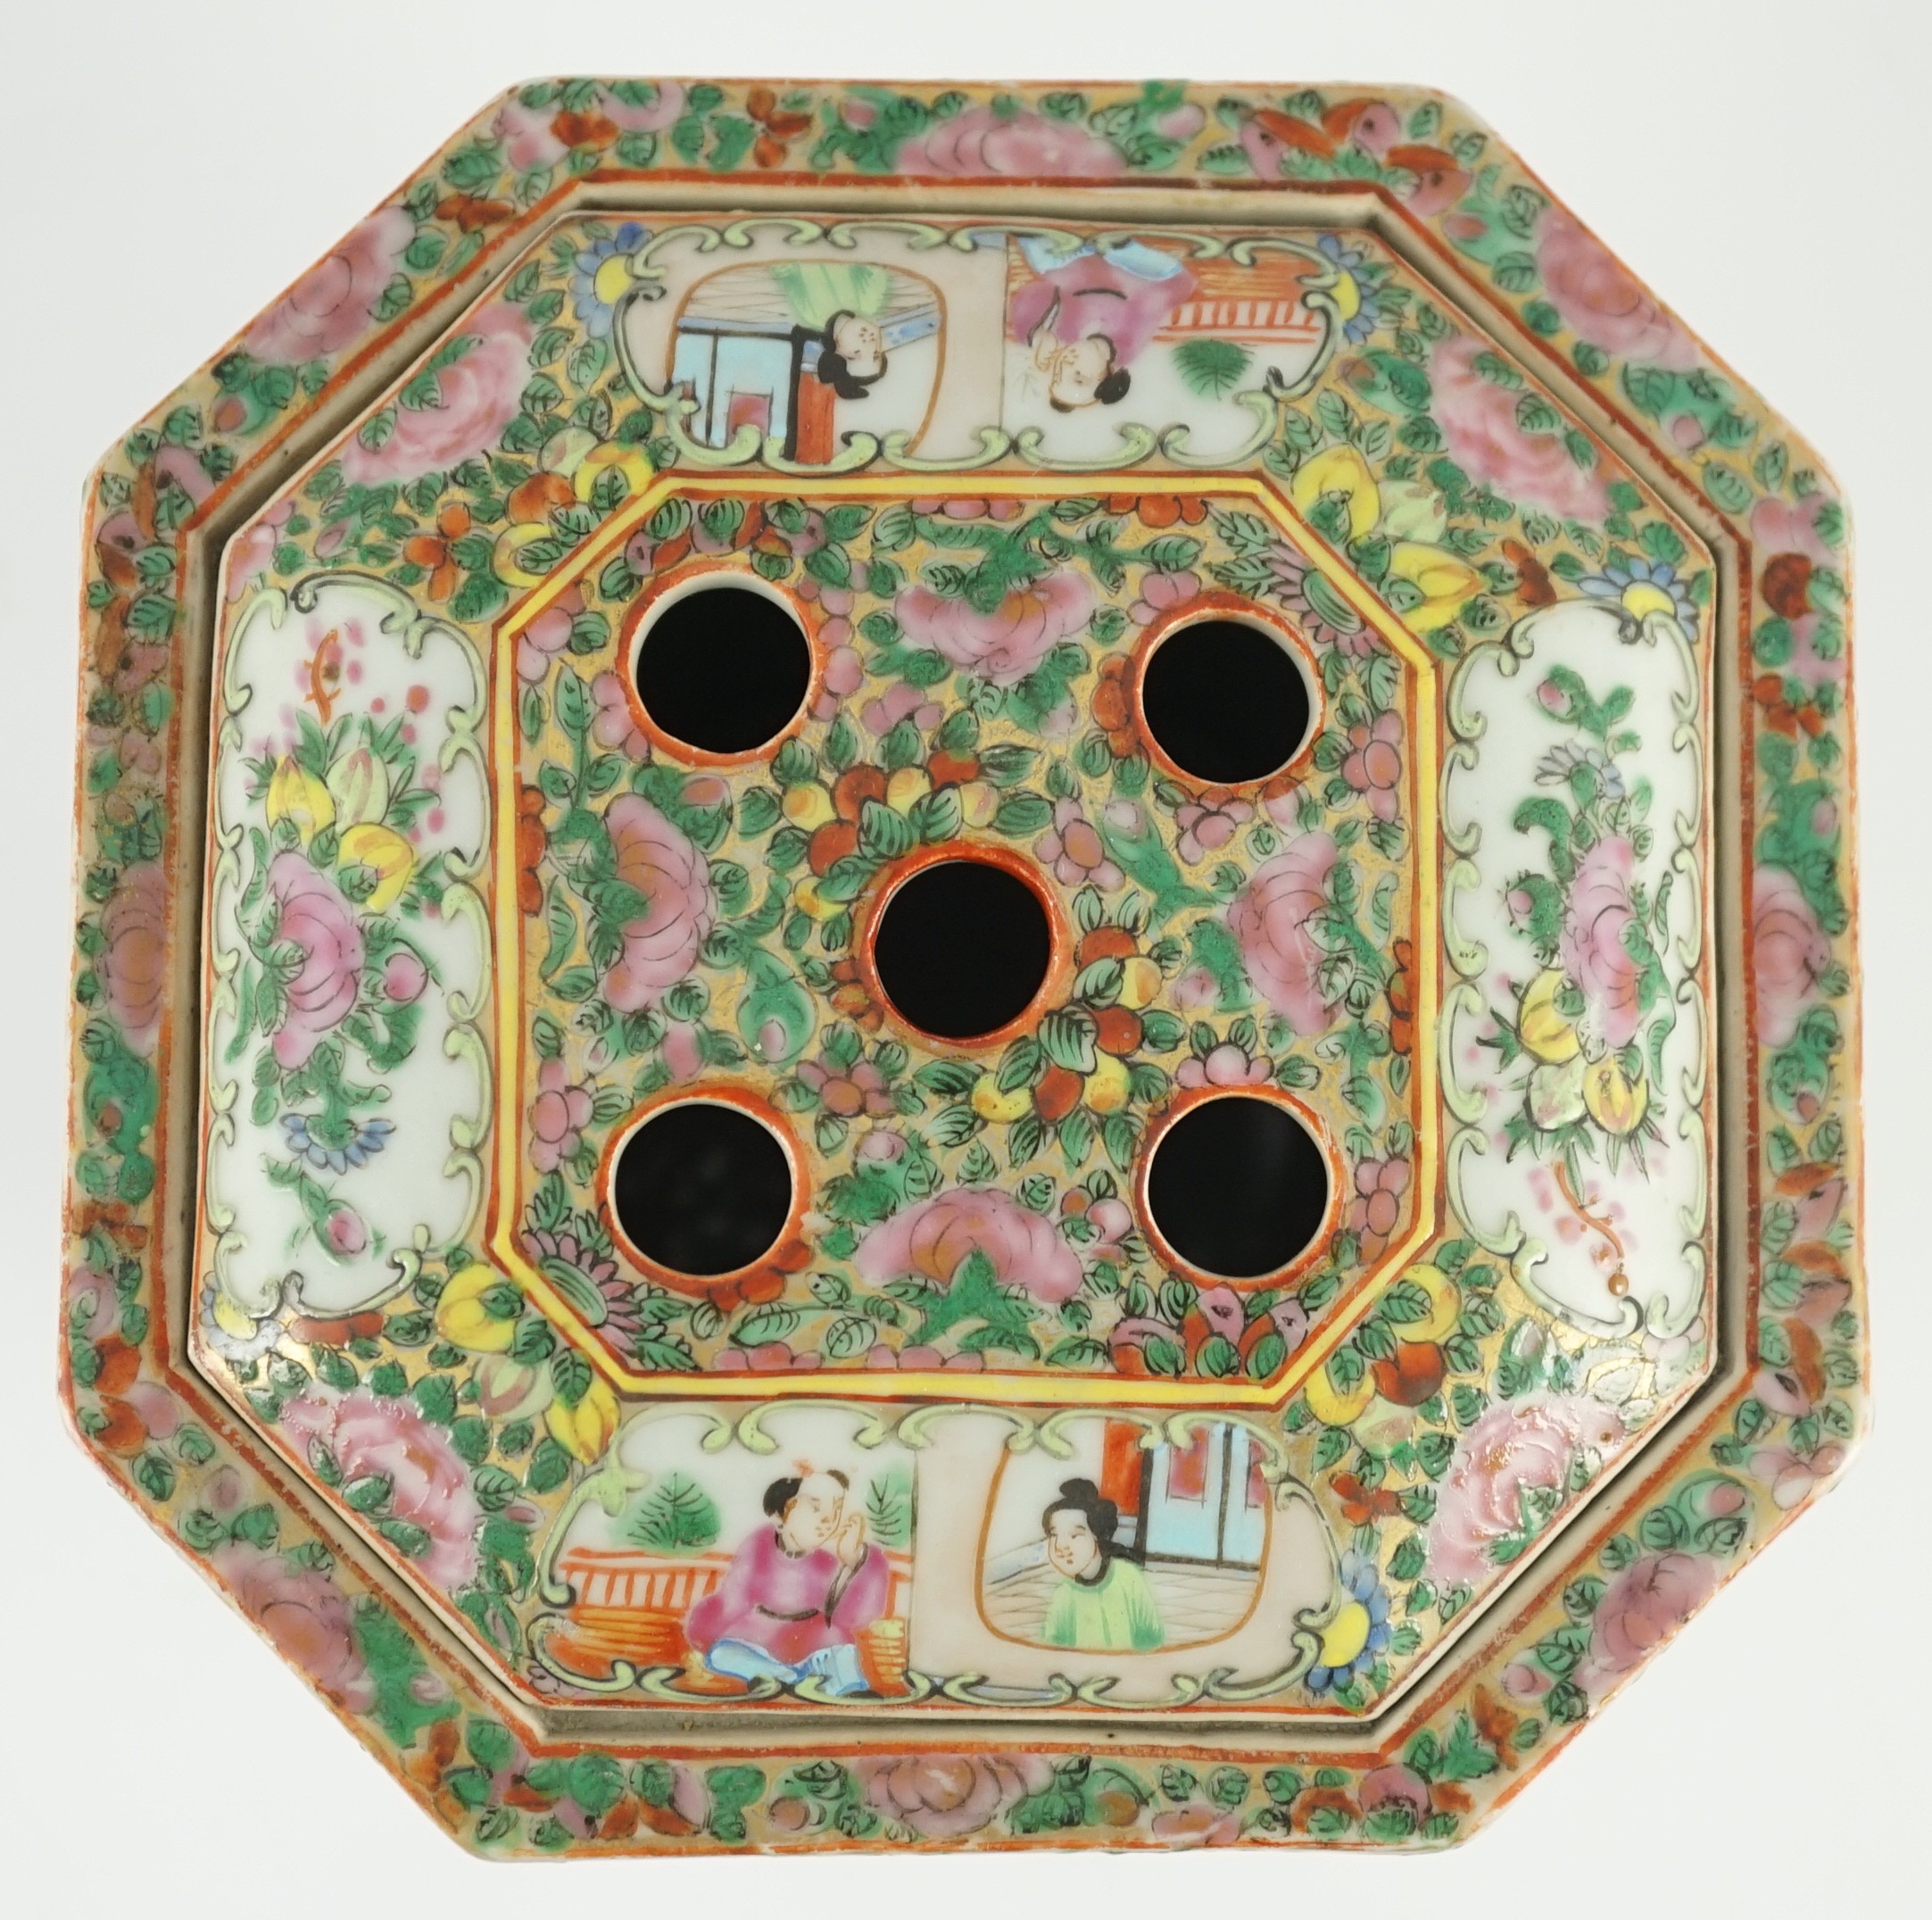 A Chinese Canton (Guangzhou) famille rose decorated bough pot and cover, c.1830, painted with - Image 5 of 9